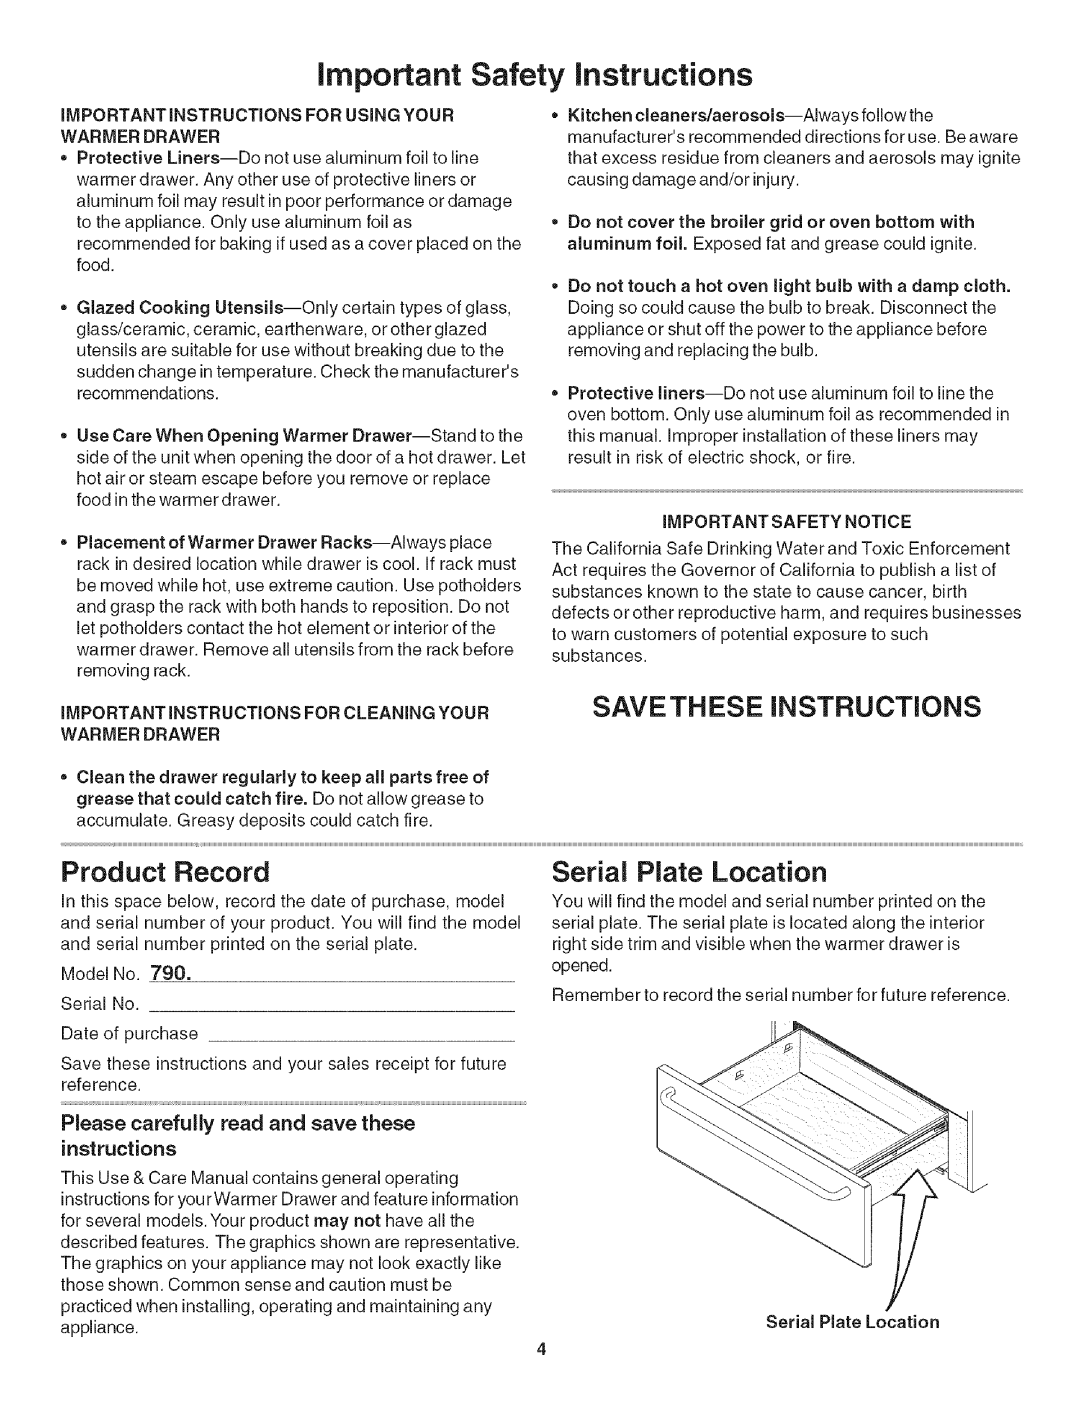 Kenmore 790.492 manual Savethese Instructions, Product Record, Serial Plate Location, important Safety instructions 